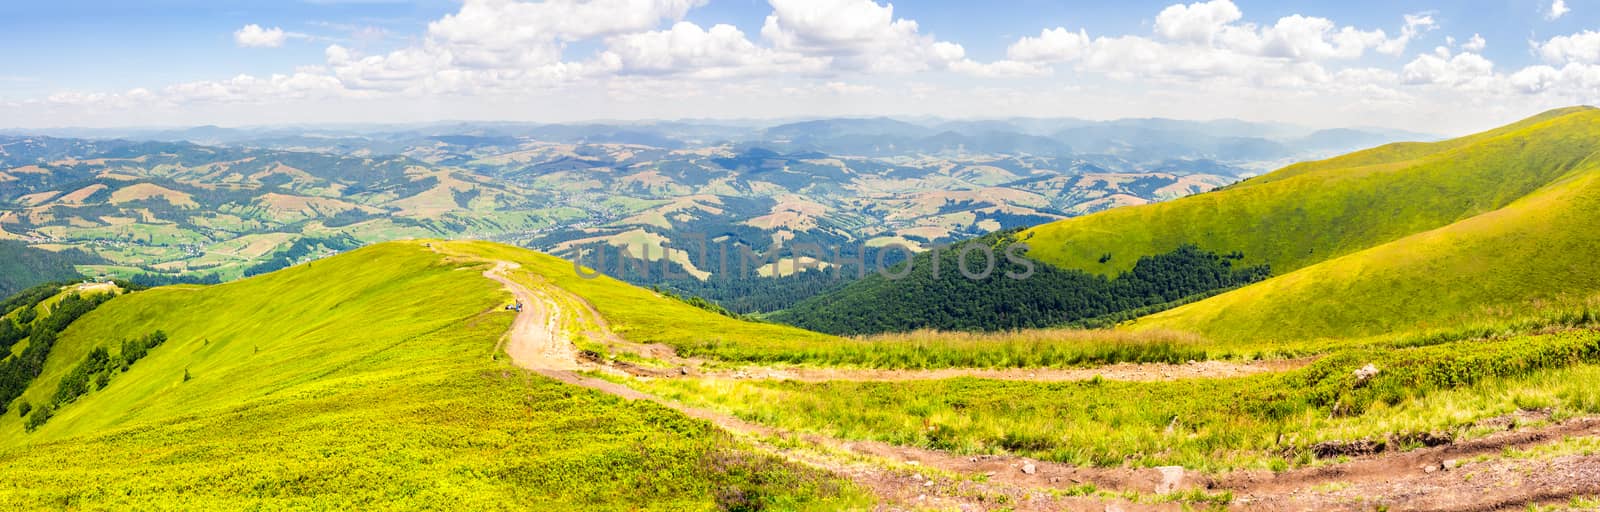 path through panoramic mountain landscape by Pellinni